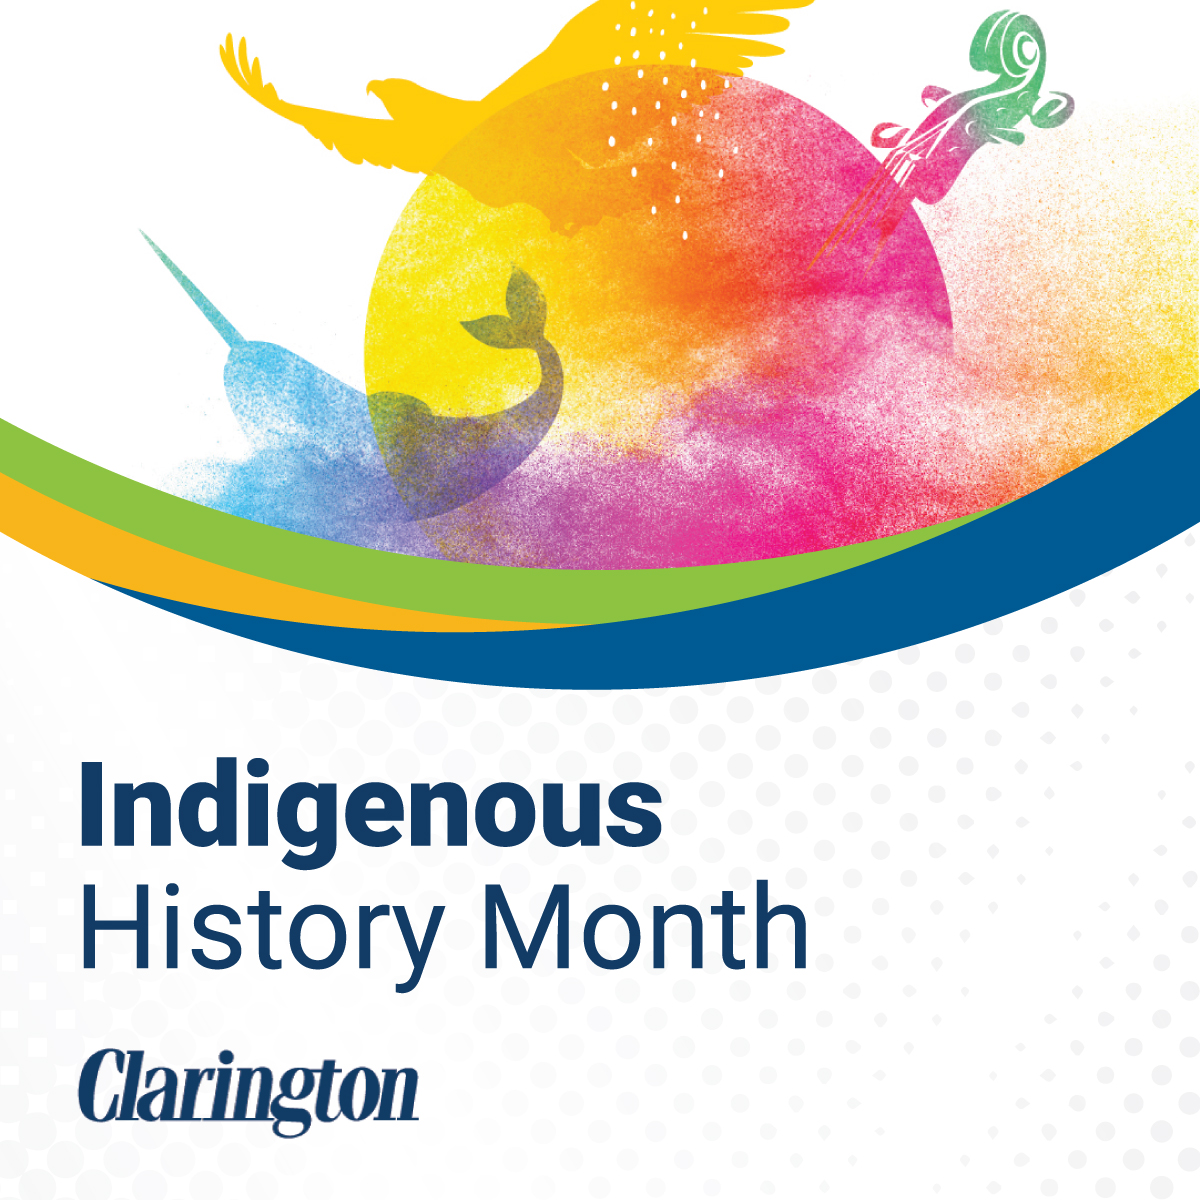 This month, we celebrate Indigenous achievements, artists, athletes, storytellers, and elders and learn about the historical and current social, economic, and cultural impact of Indigenous peoples in #Clarington and across Canada. 

Happy #NationalIndigenousHistoryMonth!